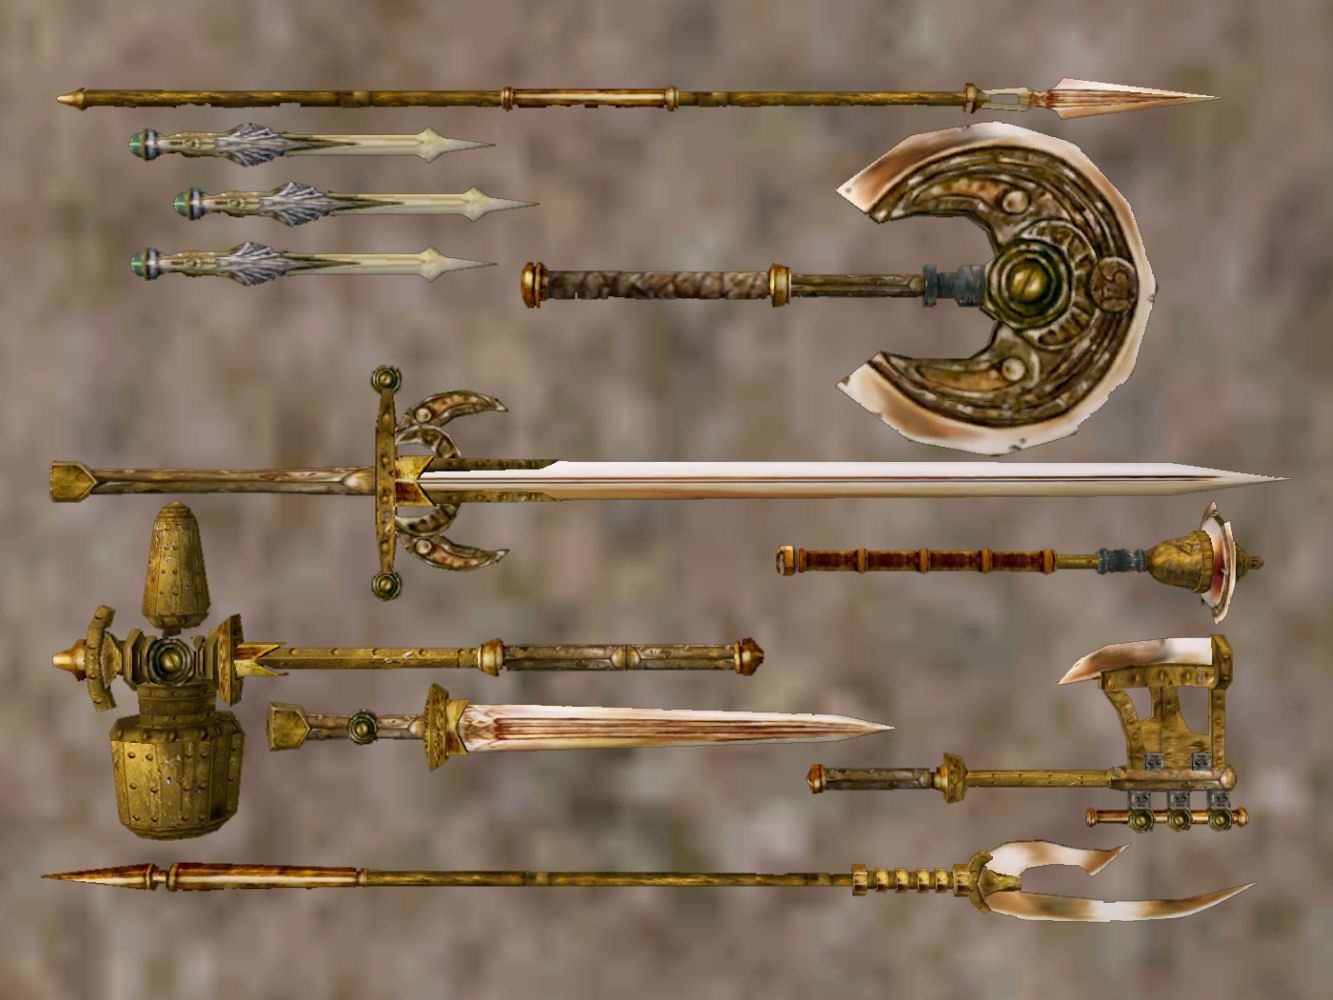 Morrowind mods: Weapon Replacers